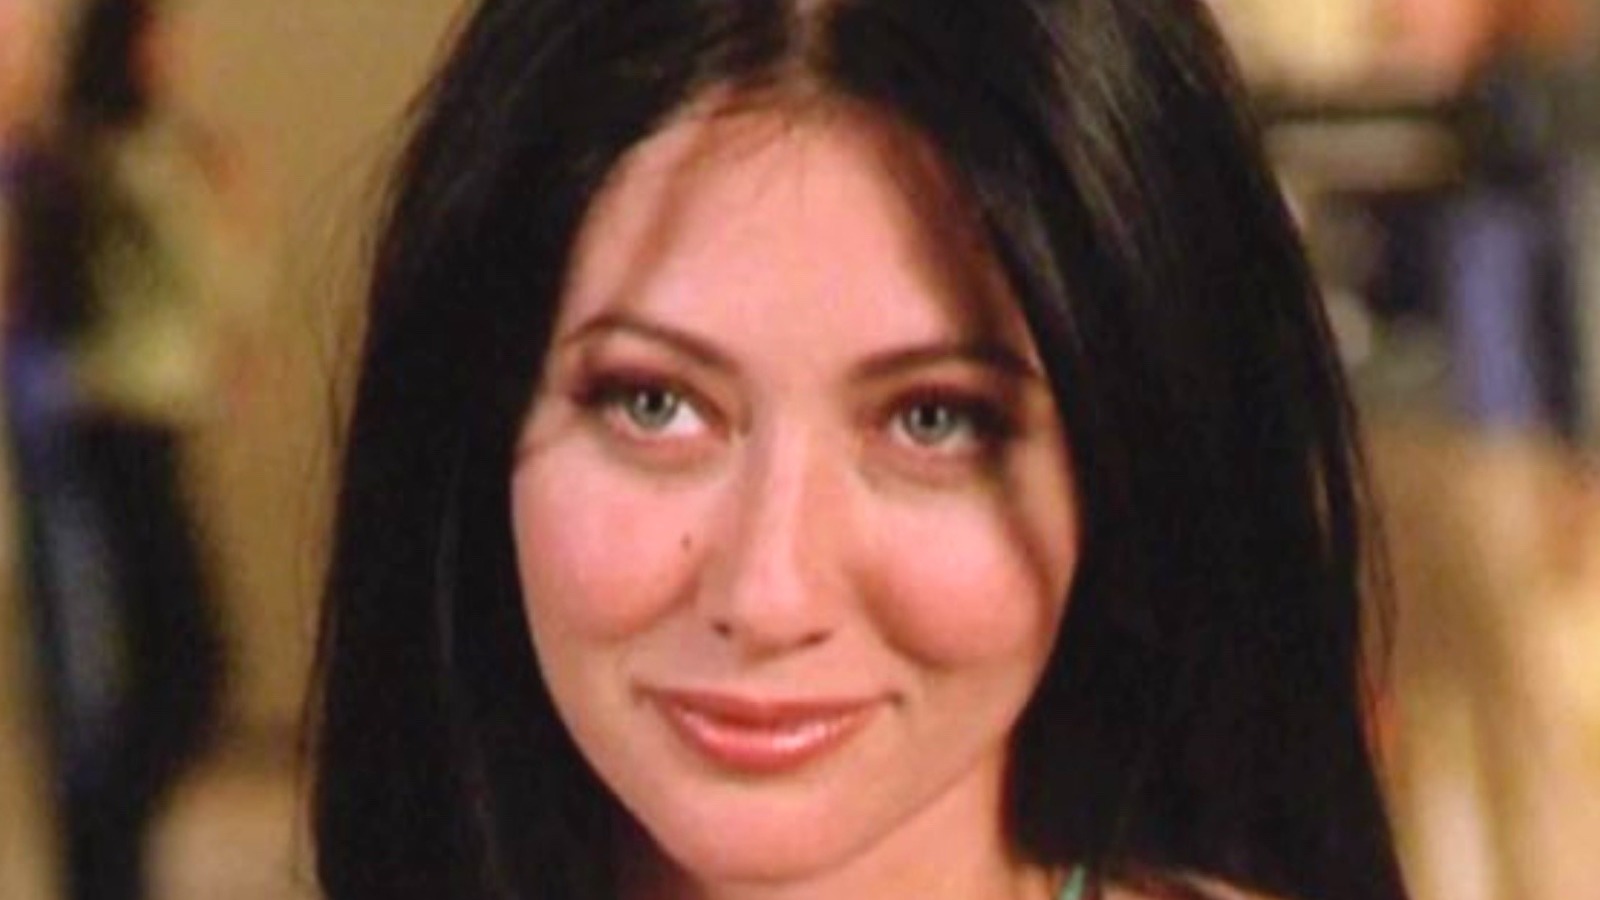 Alyssa Milano on 'Charmed' costar Shannen Doherty: 'I could take